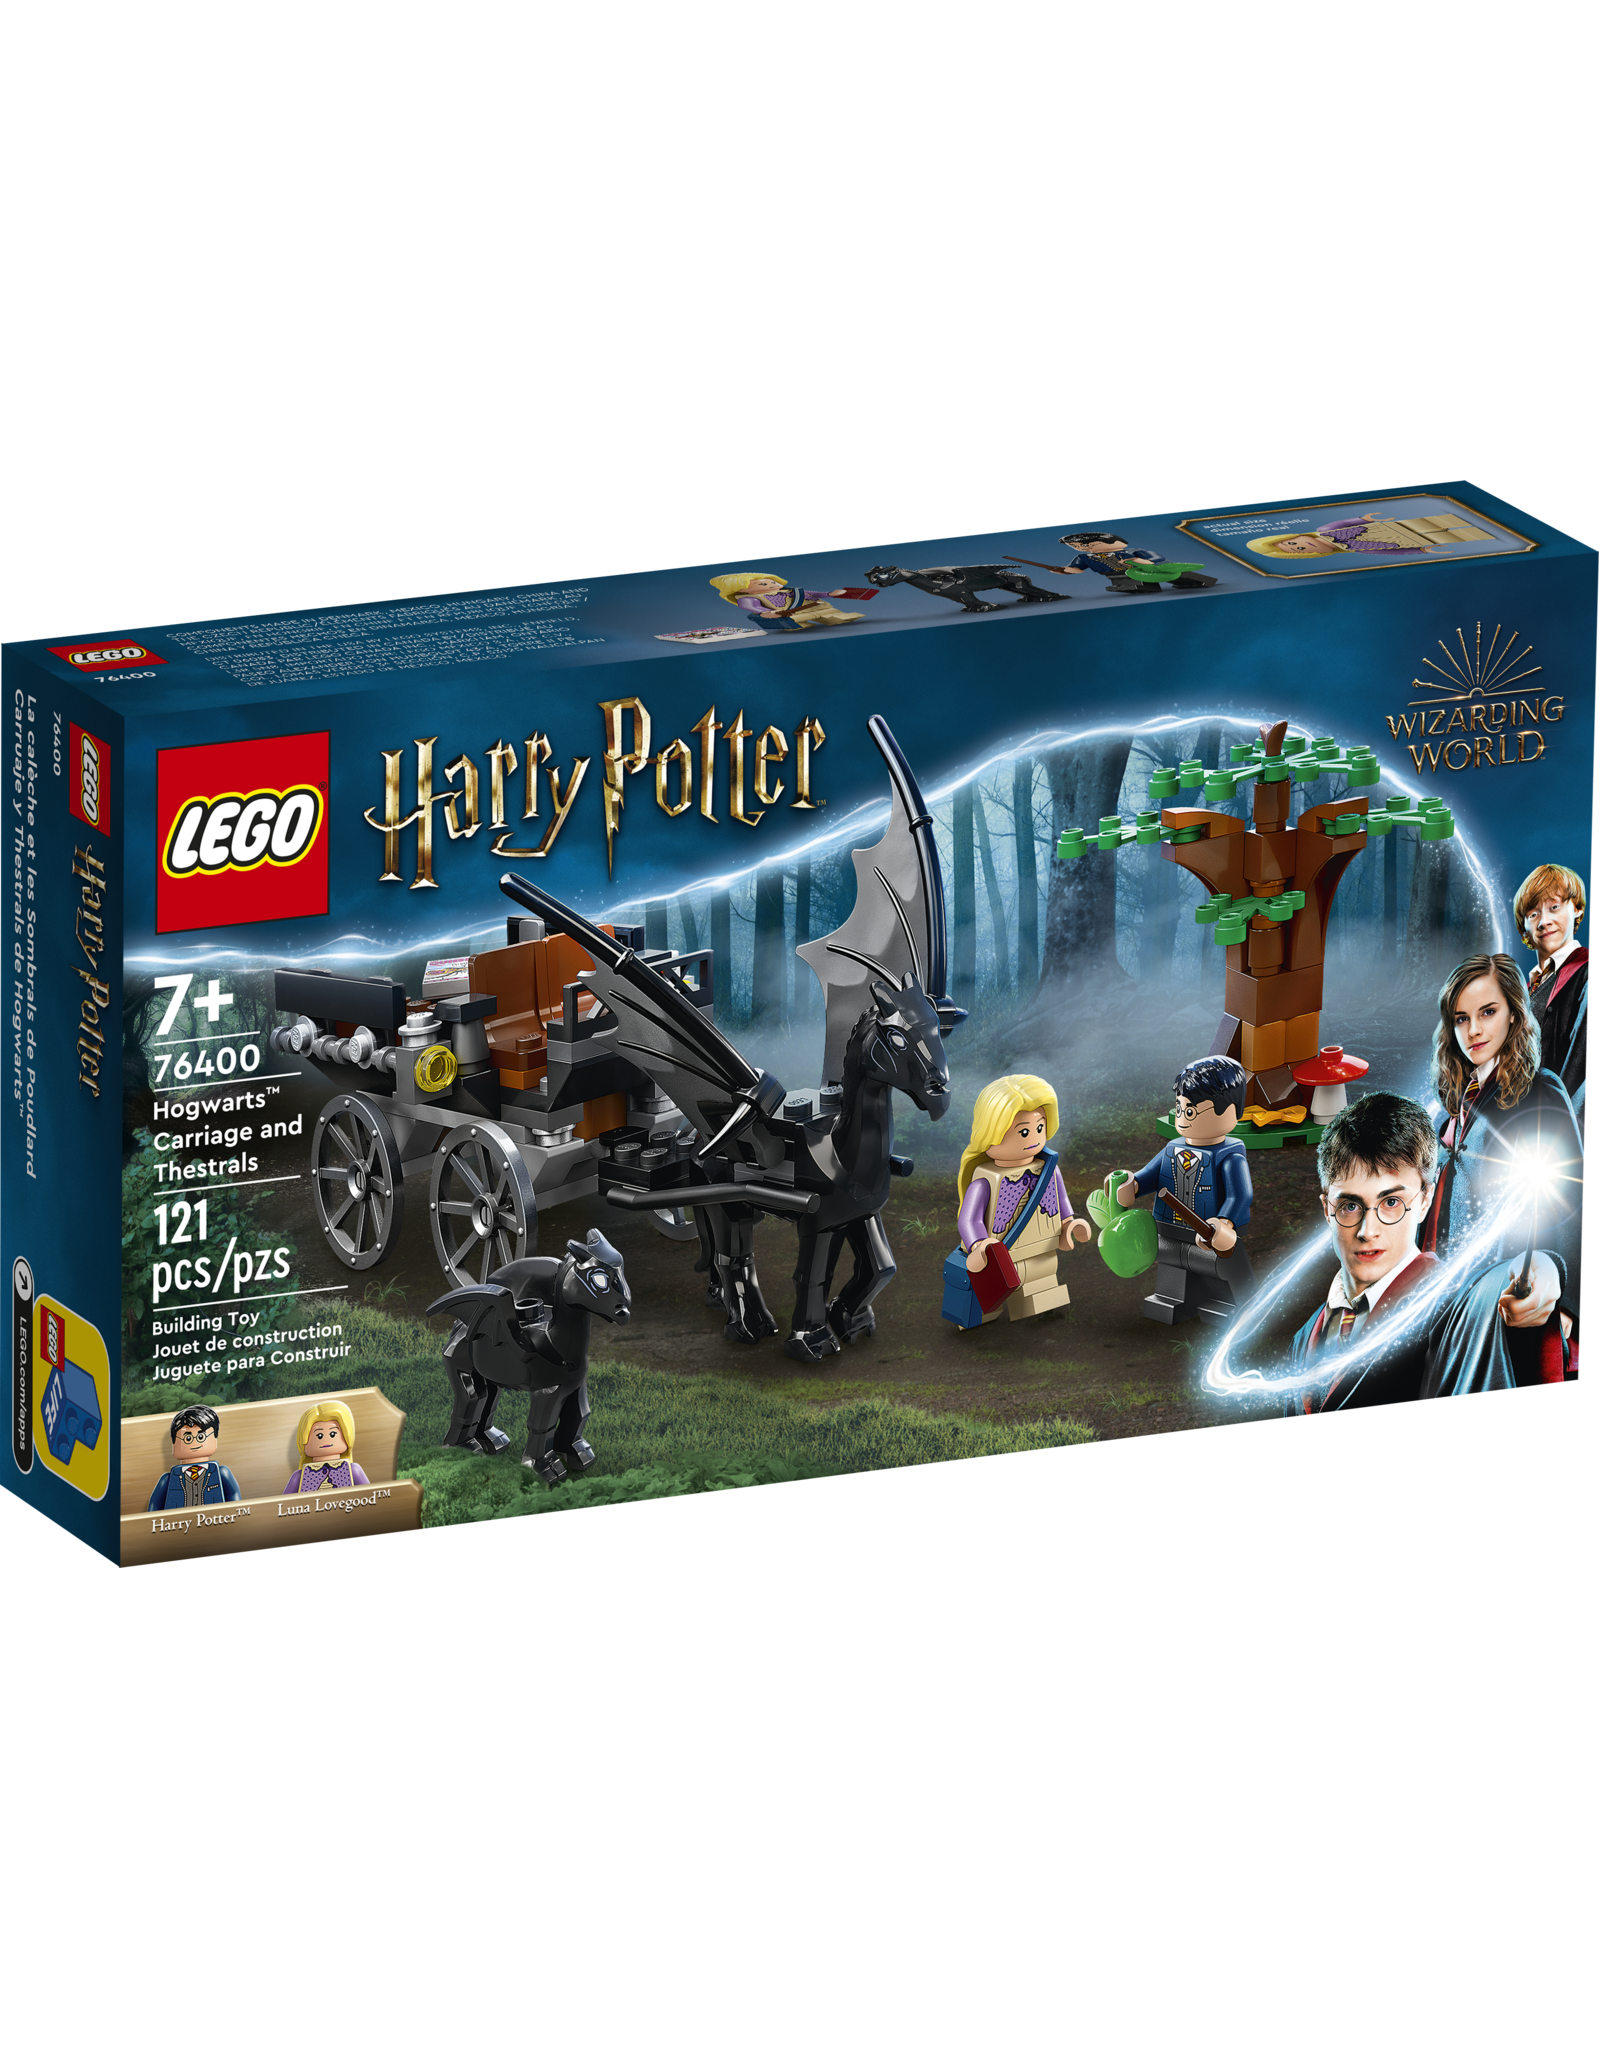 LEGO Harry Potter  Carriage and Thestrals 76400